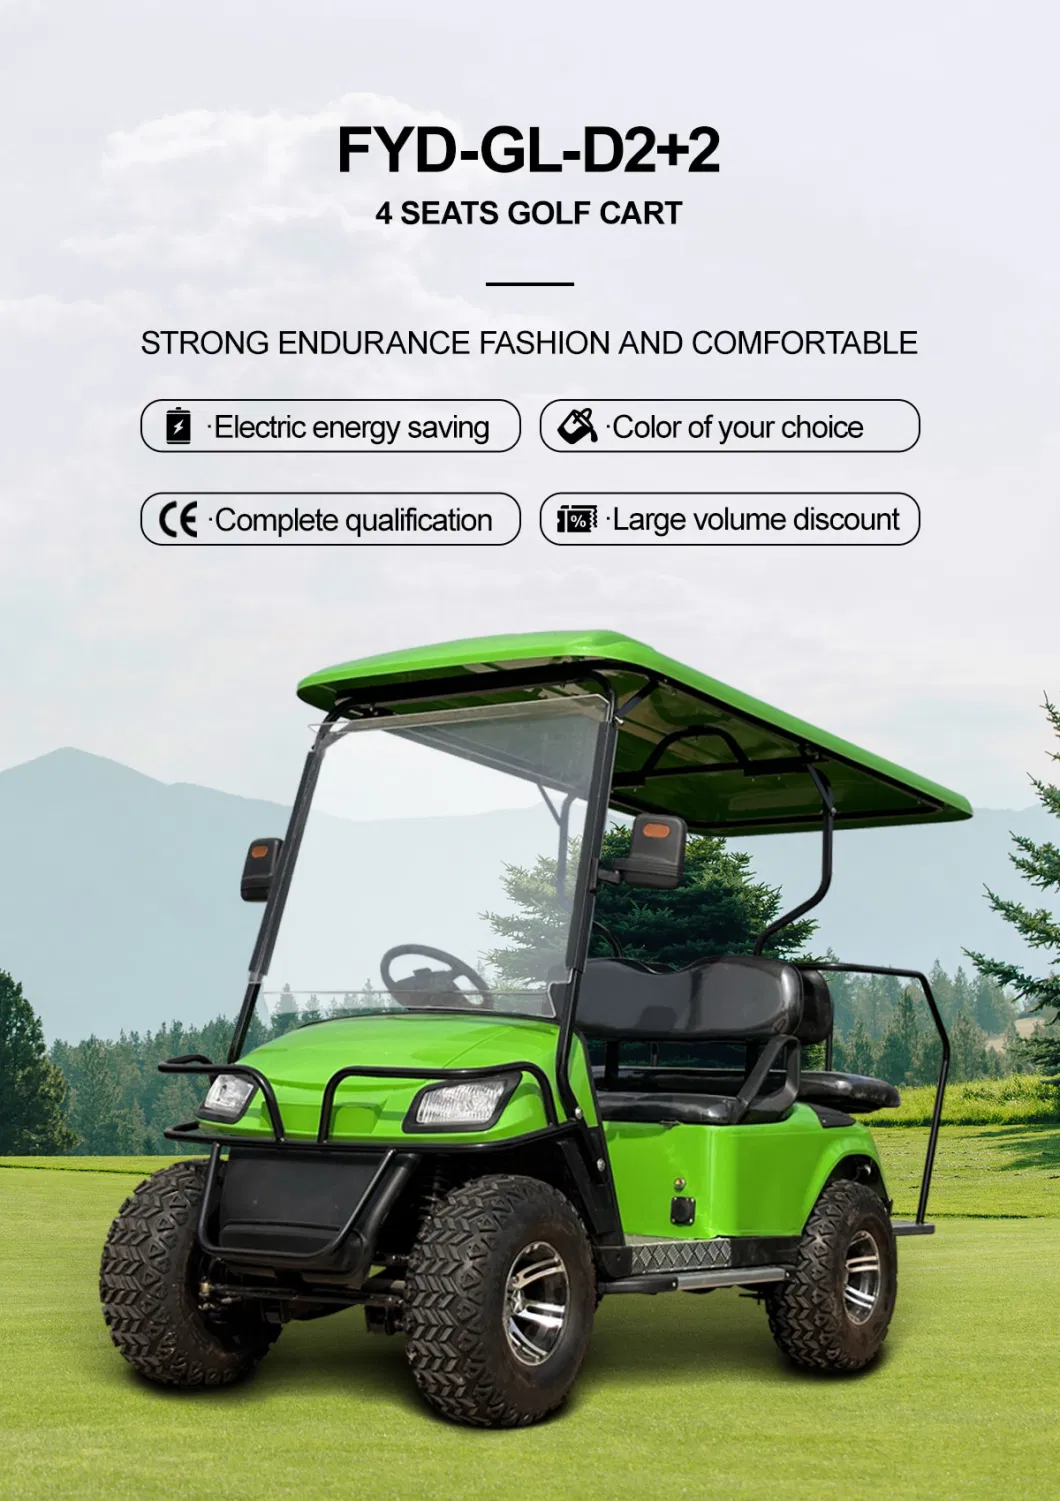 Factory Price Customized Luxury Airport Zone Cart Club Car 2 4 Seater Street Legal Golf Buggy with Lift Seat